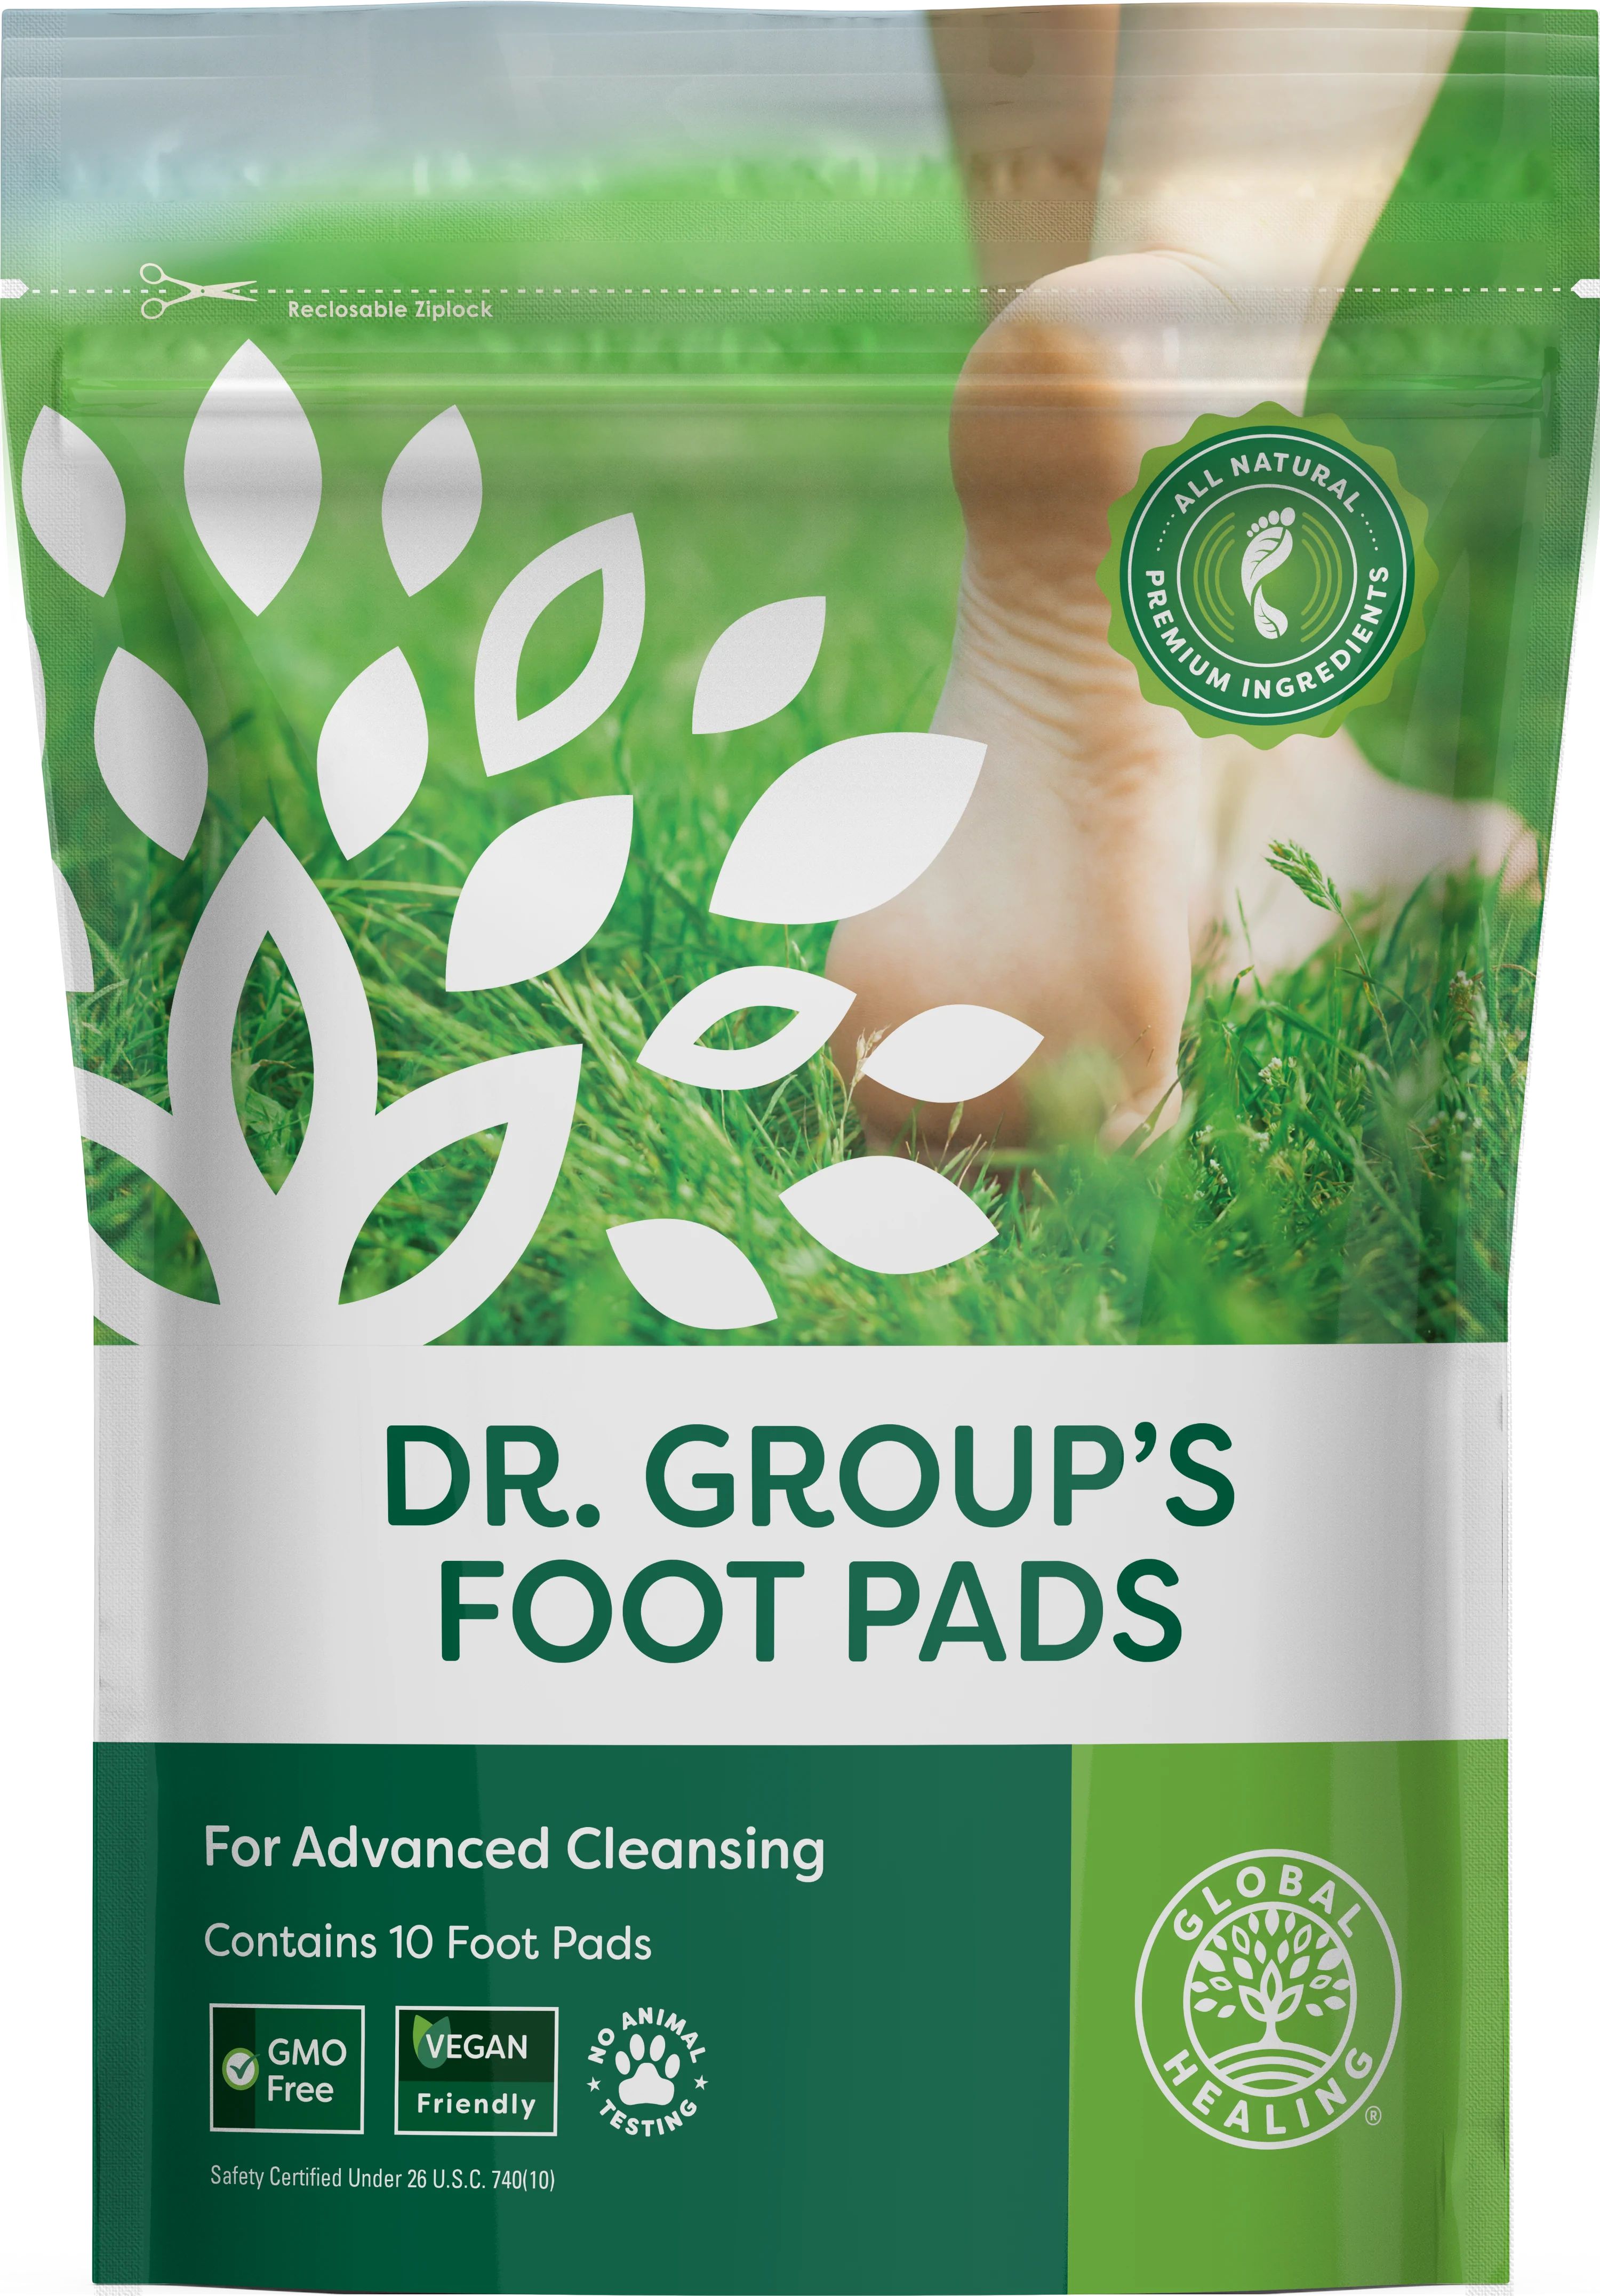 Dr. Group's Foot Pads | Global Healing Center